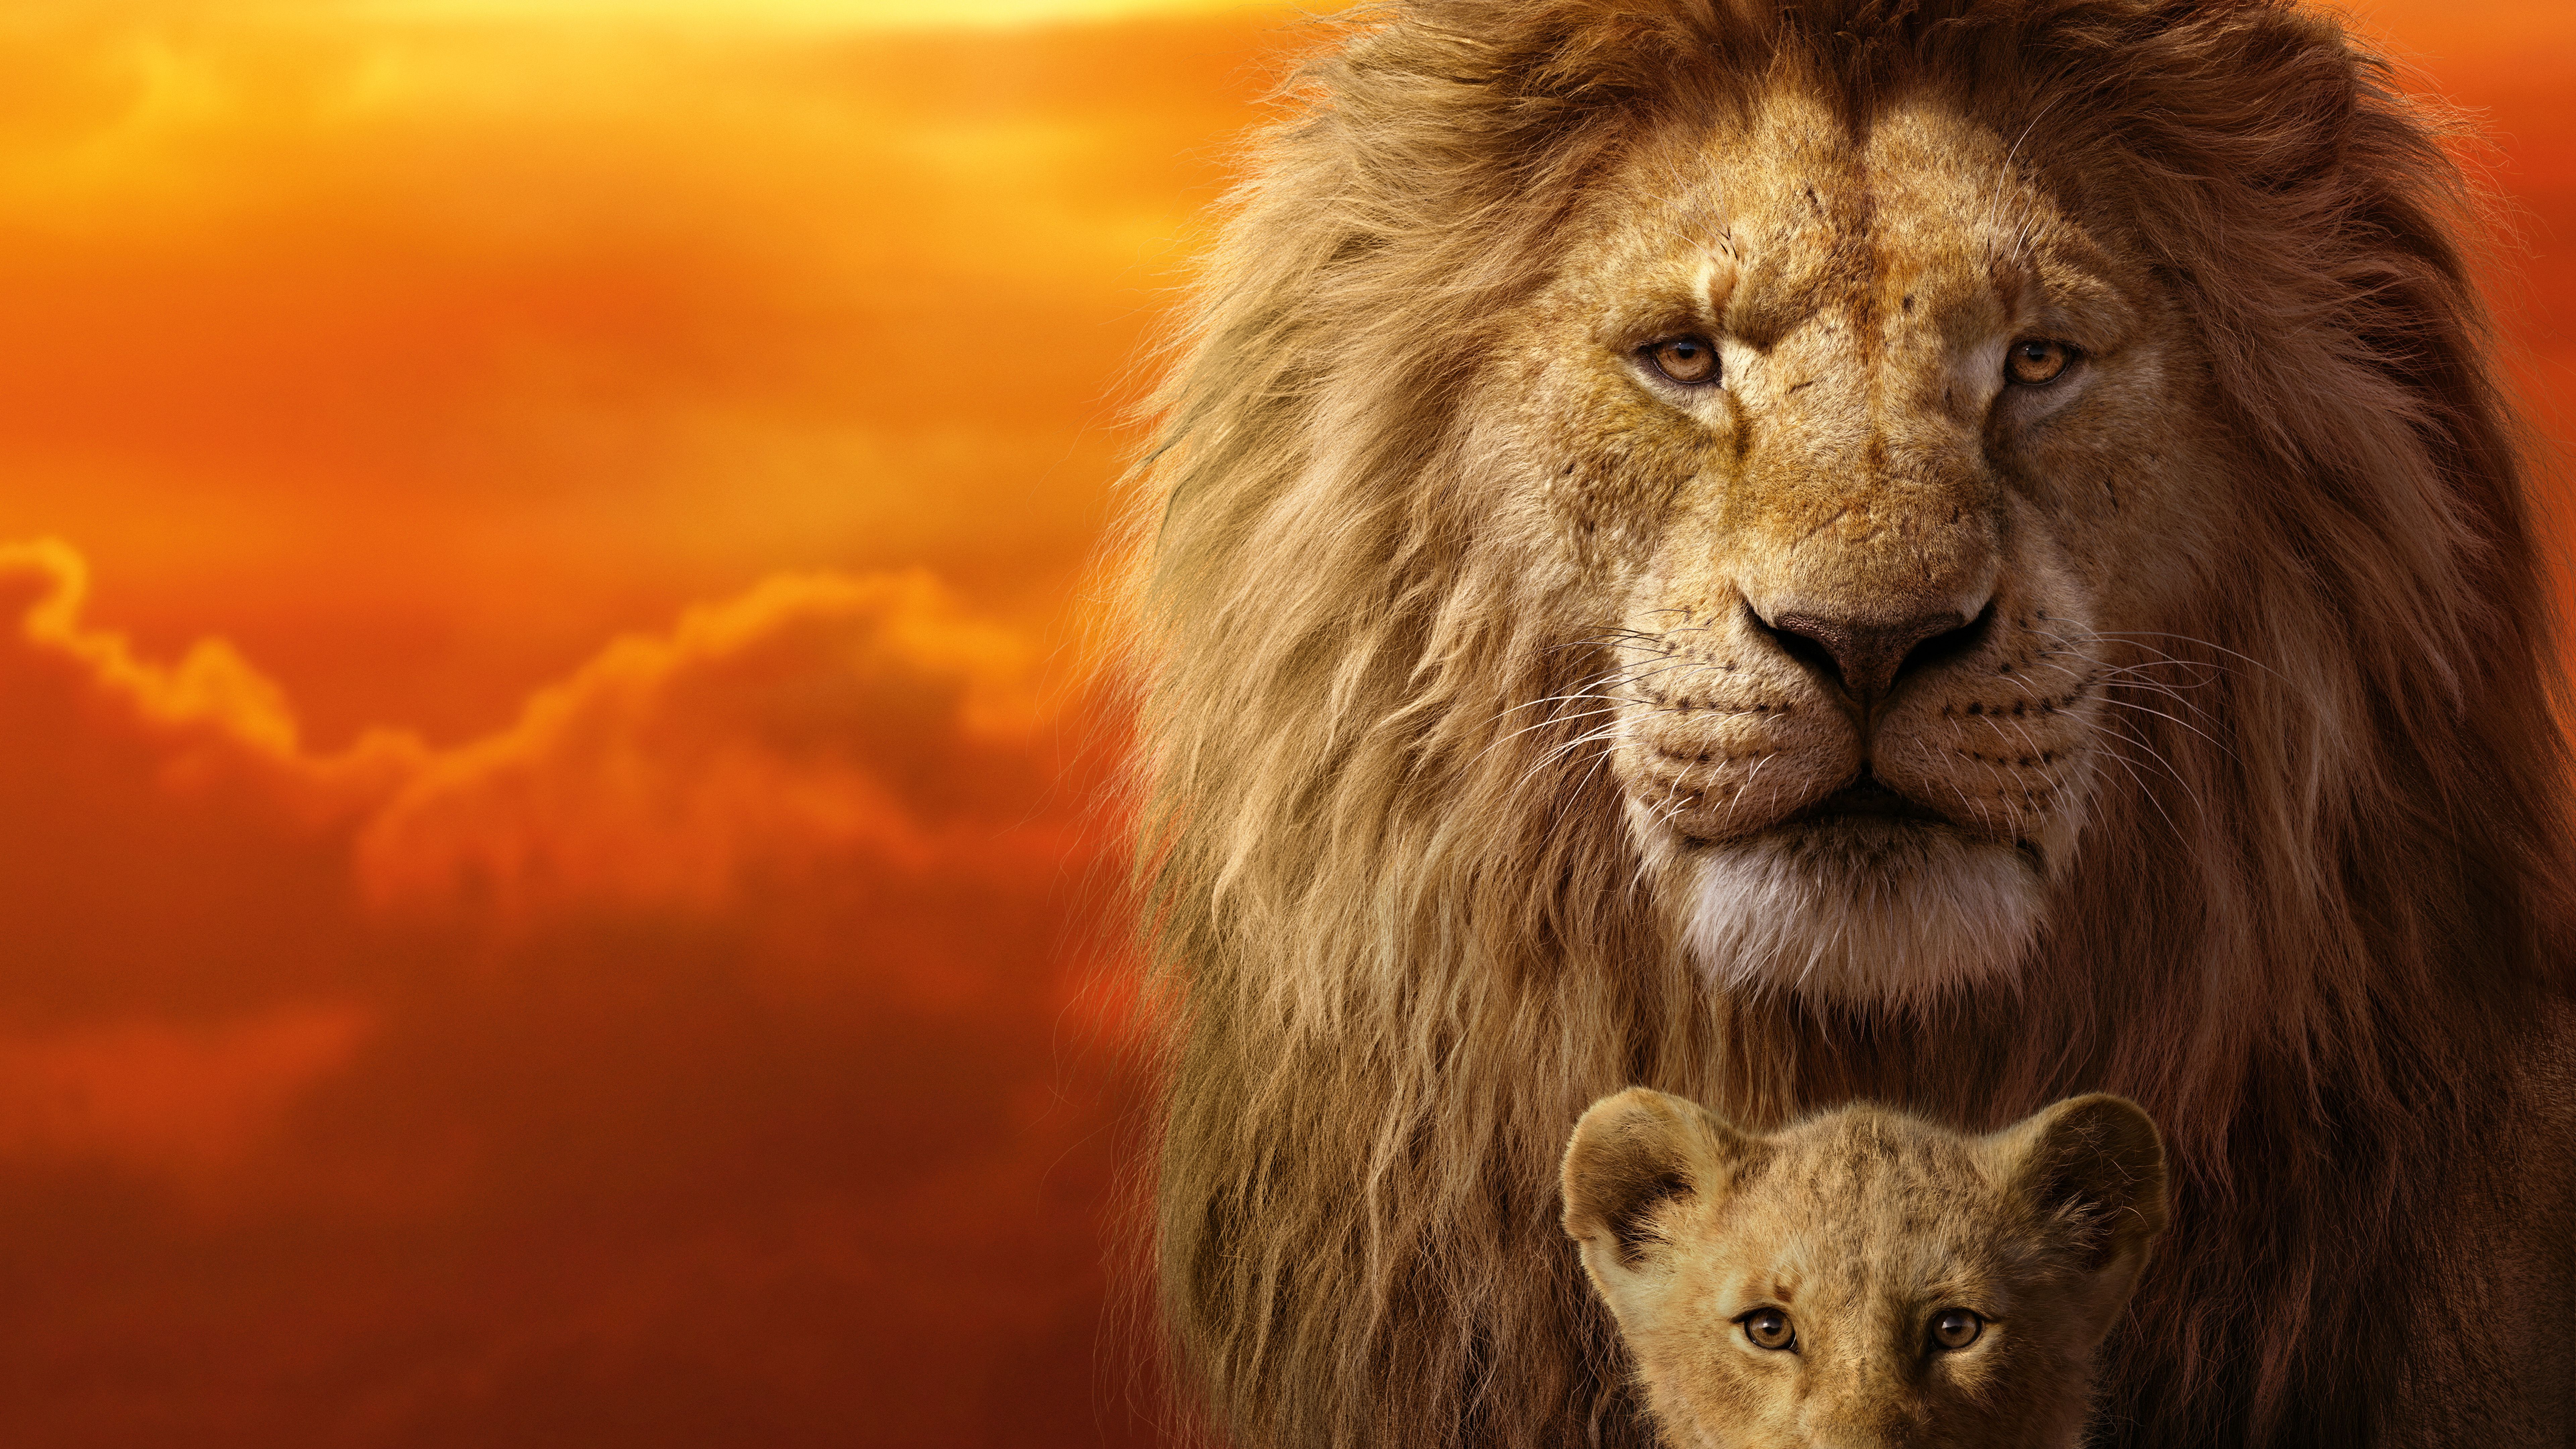 Lion King Full Hd Wallpapers Download